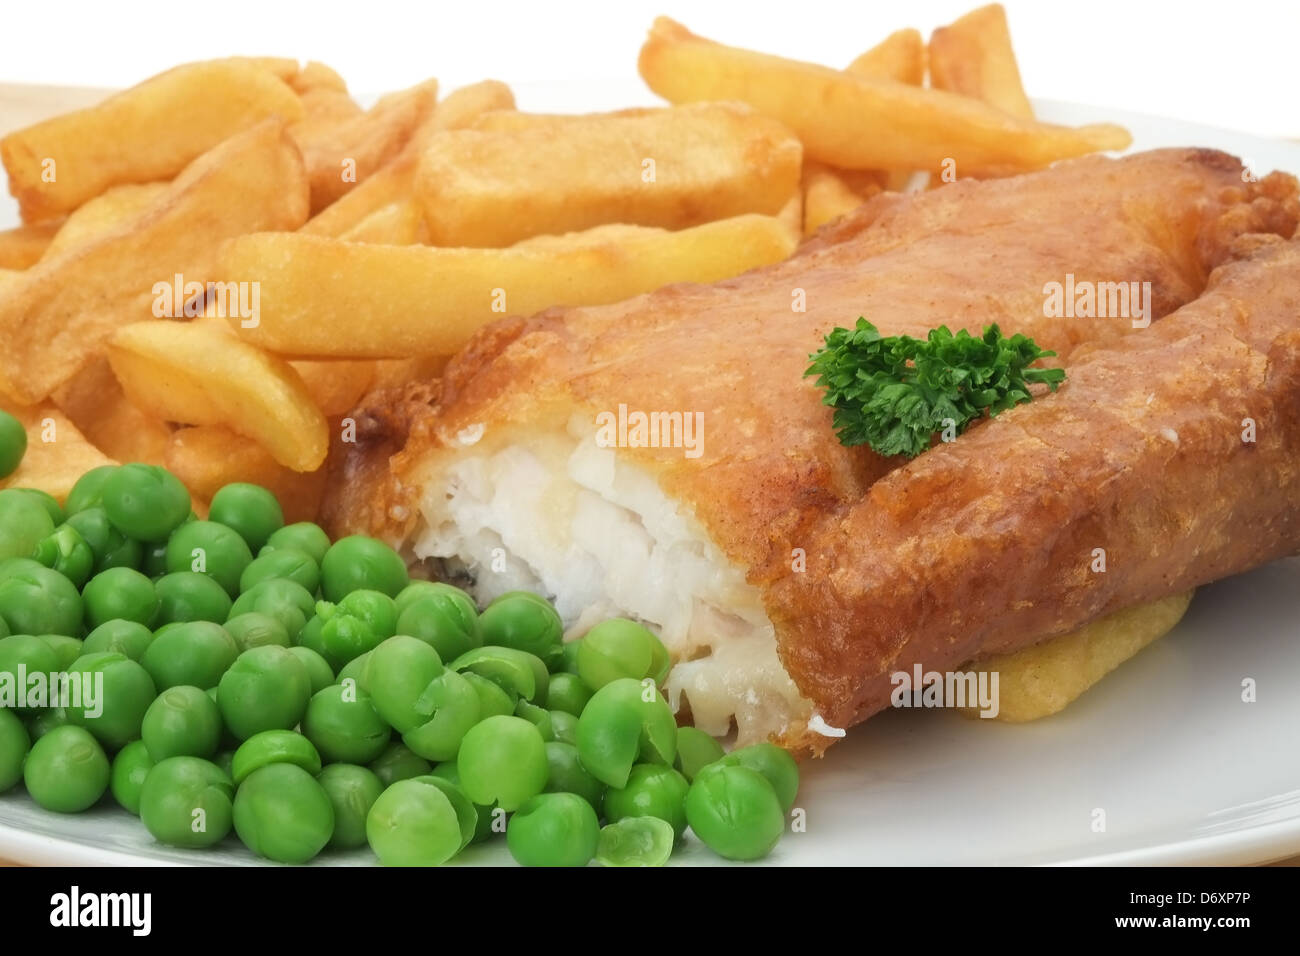 Close-up of a plate of fish, chips and peas - shallow depth of field Stock Photo